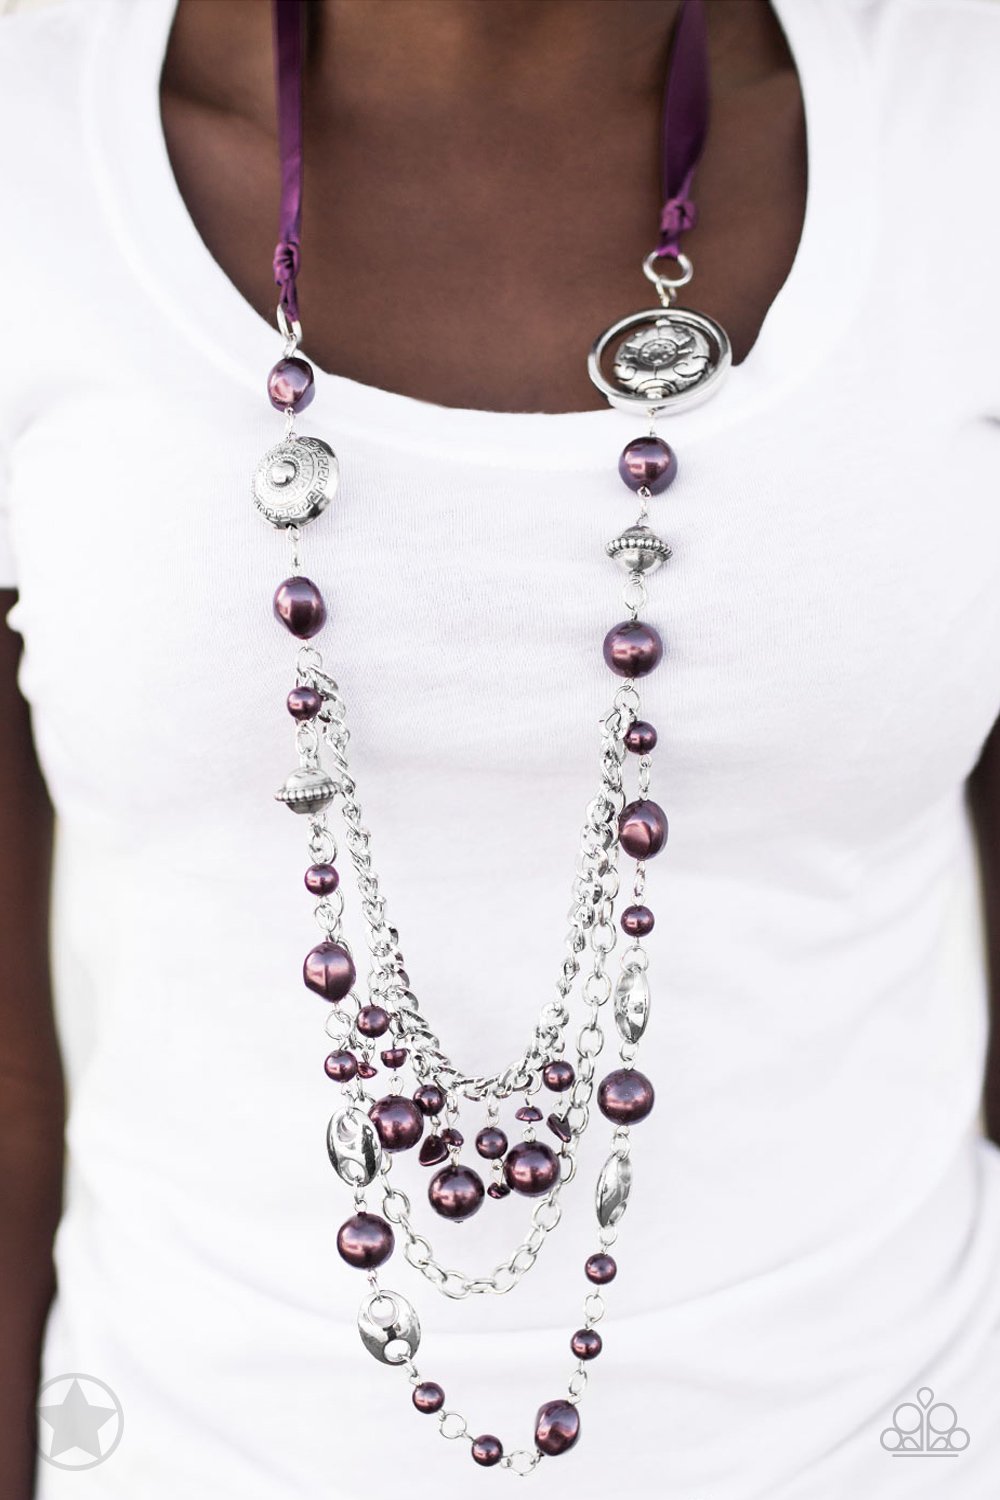 Paparazzi Accessories - All The Trimmings - Purple Necklace